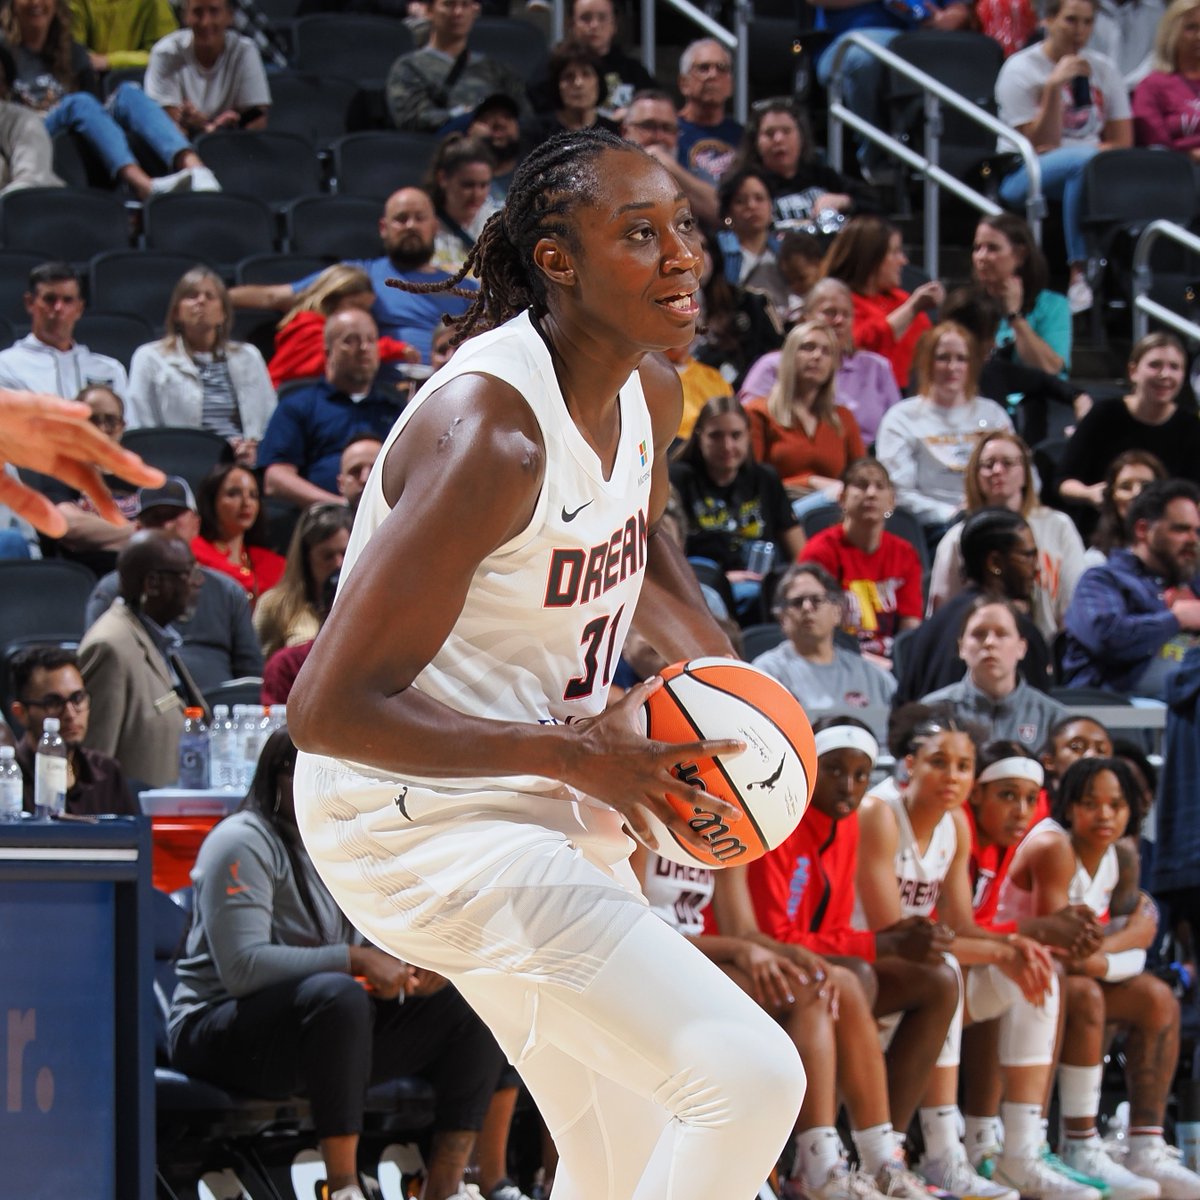 Halftime in LA ⤵️ WE HAVE A TIED GAME AT 48-48 🔥 Tina Charles is standin' on business for the @AtlantaDream with 17 PTS and 5 REBS in the 1H Dearica Hamby is leading the way for the @LASparks with 13 PTS and 6 REBS Stream on the ‘watch’ tab of the WNBA App with no